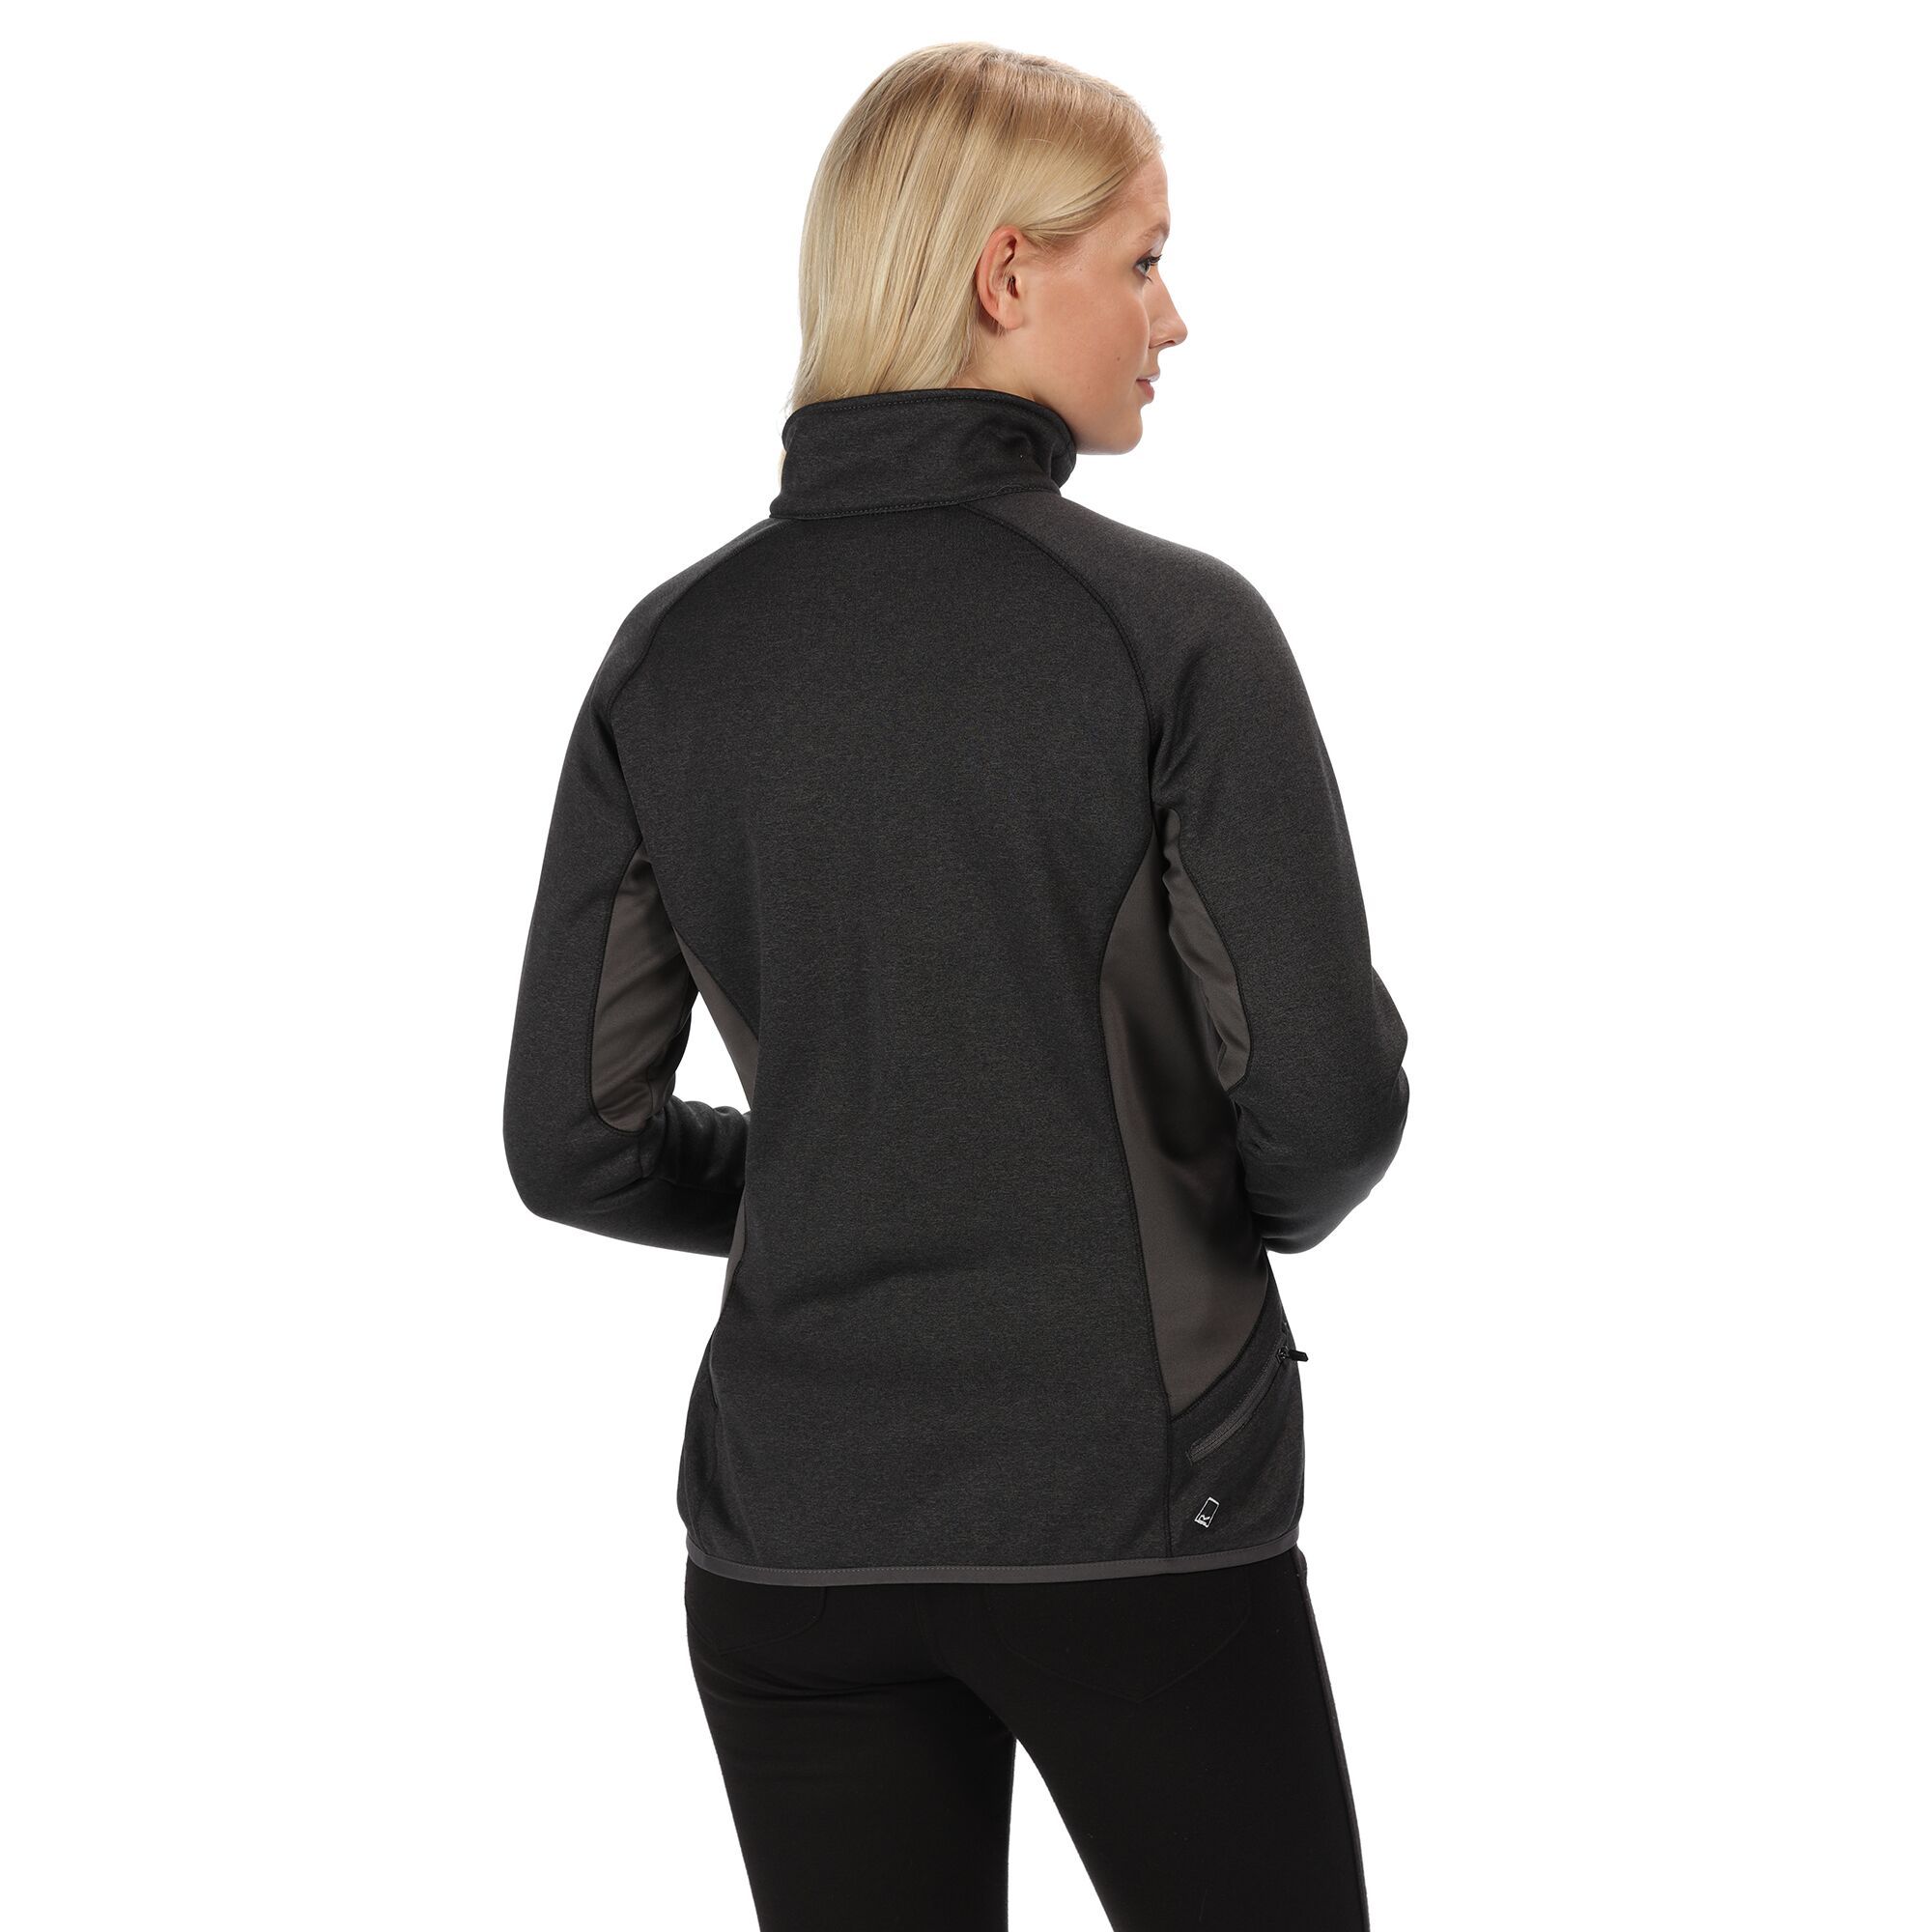 Made of polyester marl fabric. With stretch-woven fabric and a softshell body that stops wind and sheds moisture. Extol stretch panels on the sides allow full reach and movement. Cut hip length with motion-friendly, raglan sleeves that sit smoothly and a breeze-blocking stand collar. With stretch binding for a contoured fit that stays in place and seals out the elements. Zipped pocket on the side plus one the chest for valuables. With the Regatta Outdoors badge on the sleeve. Size (chest): (6 UK) 30in, (8 UK) 32in, (10 UK) 34in, (12 UK) 36in, (14 UK) 38in, (16 UK) 40in, (18 UK) 43in, (20 UK) 45in, (22 UK) 48in, (24 UK) 50in, (26 UK) 52in, (28 UK) 54in, (30 UK) 56in, (32 UK) 58in, (34 UK) 60in, (36 UK) 62in.